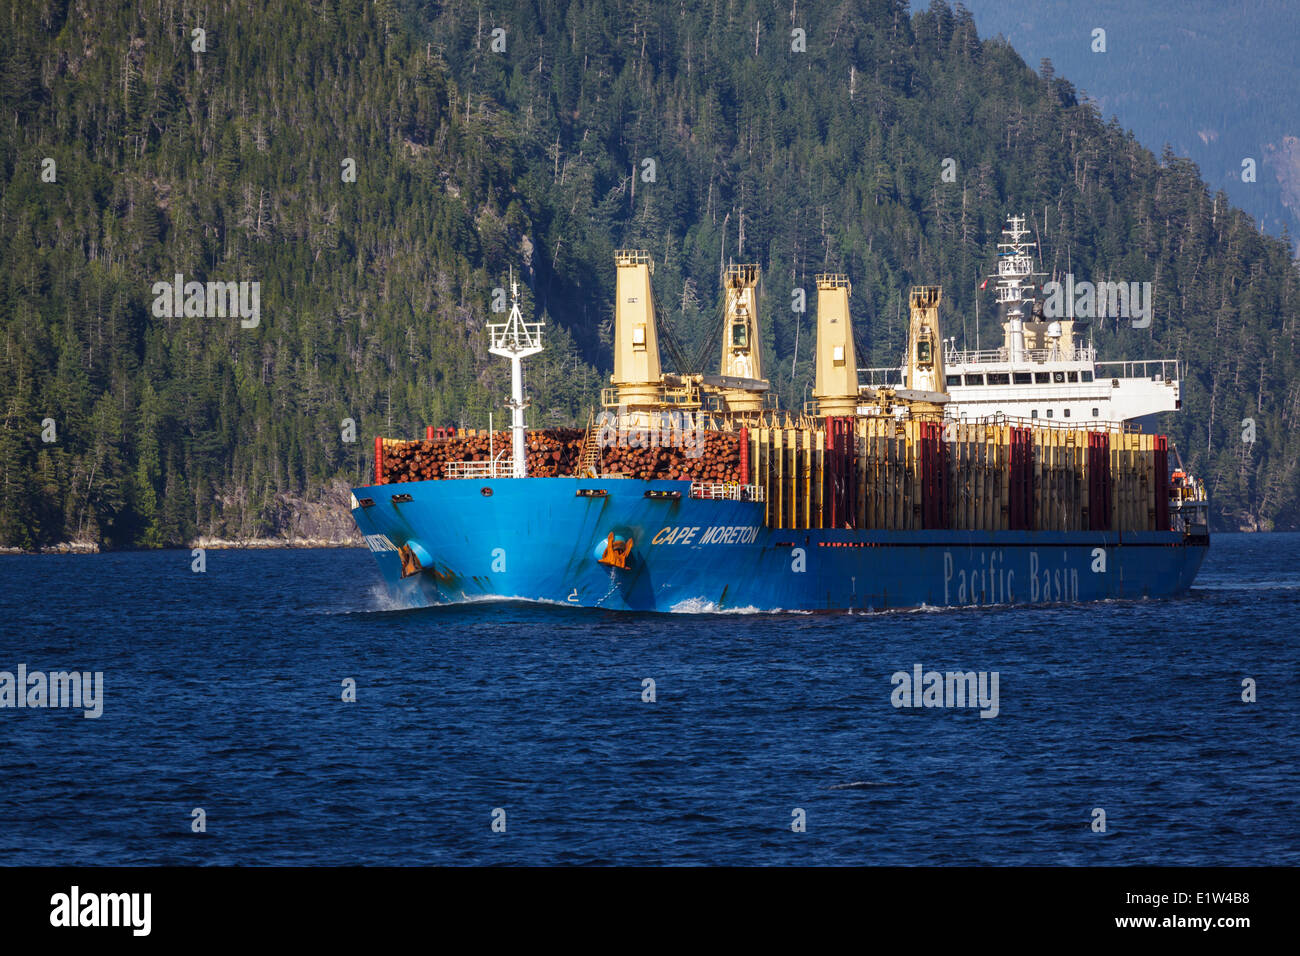 A giant tanker ship transports raw logs for export from British Columbia to Asia. Stock Photo